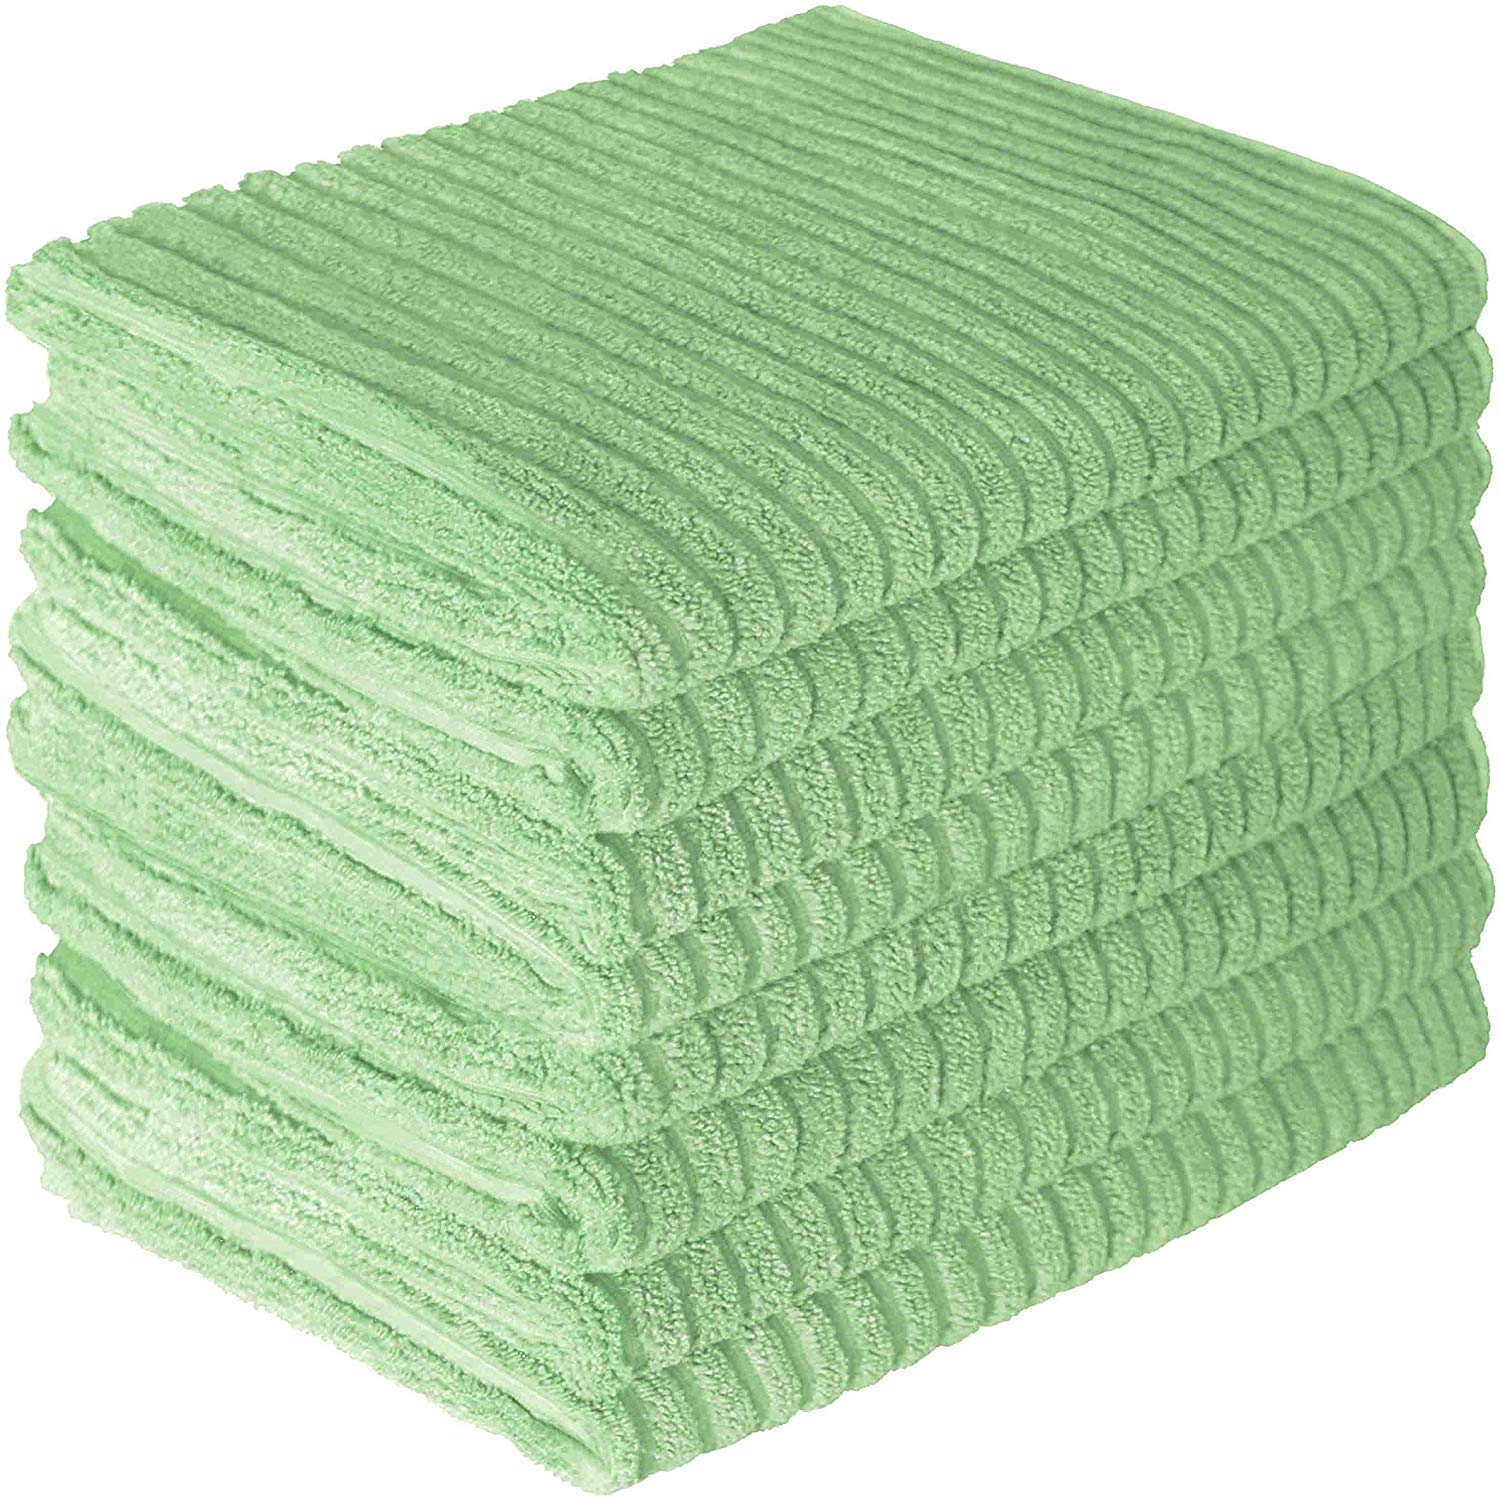 New arrival product Microfiber Kitchen Super Absorbent Dish Towels One Side Smooth Tea cotton Towels